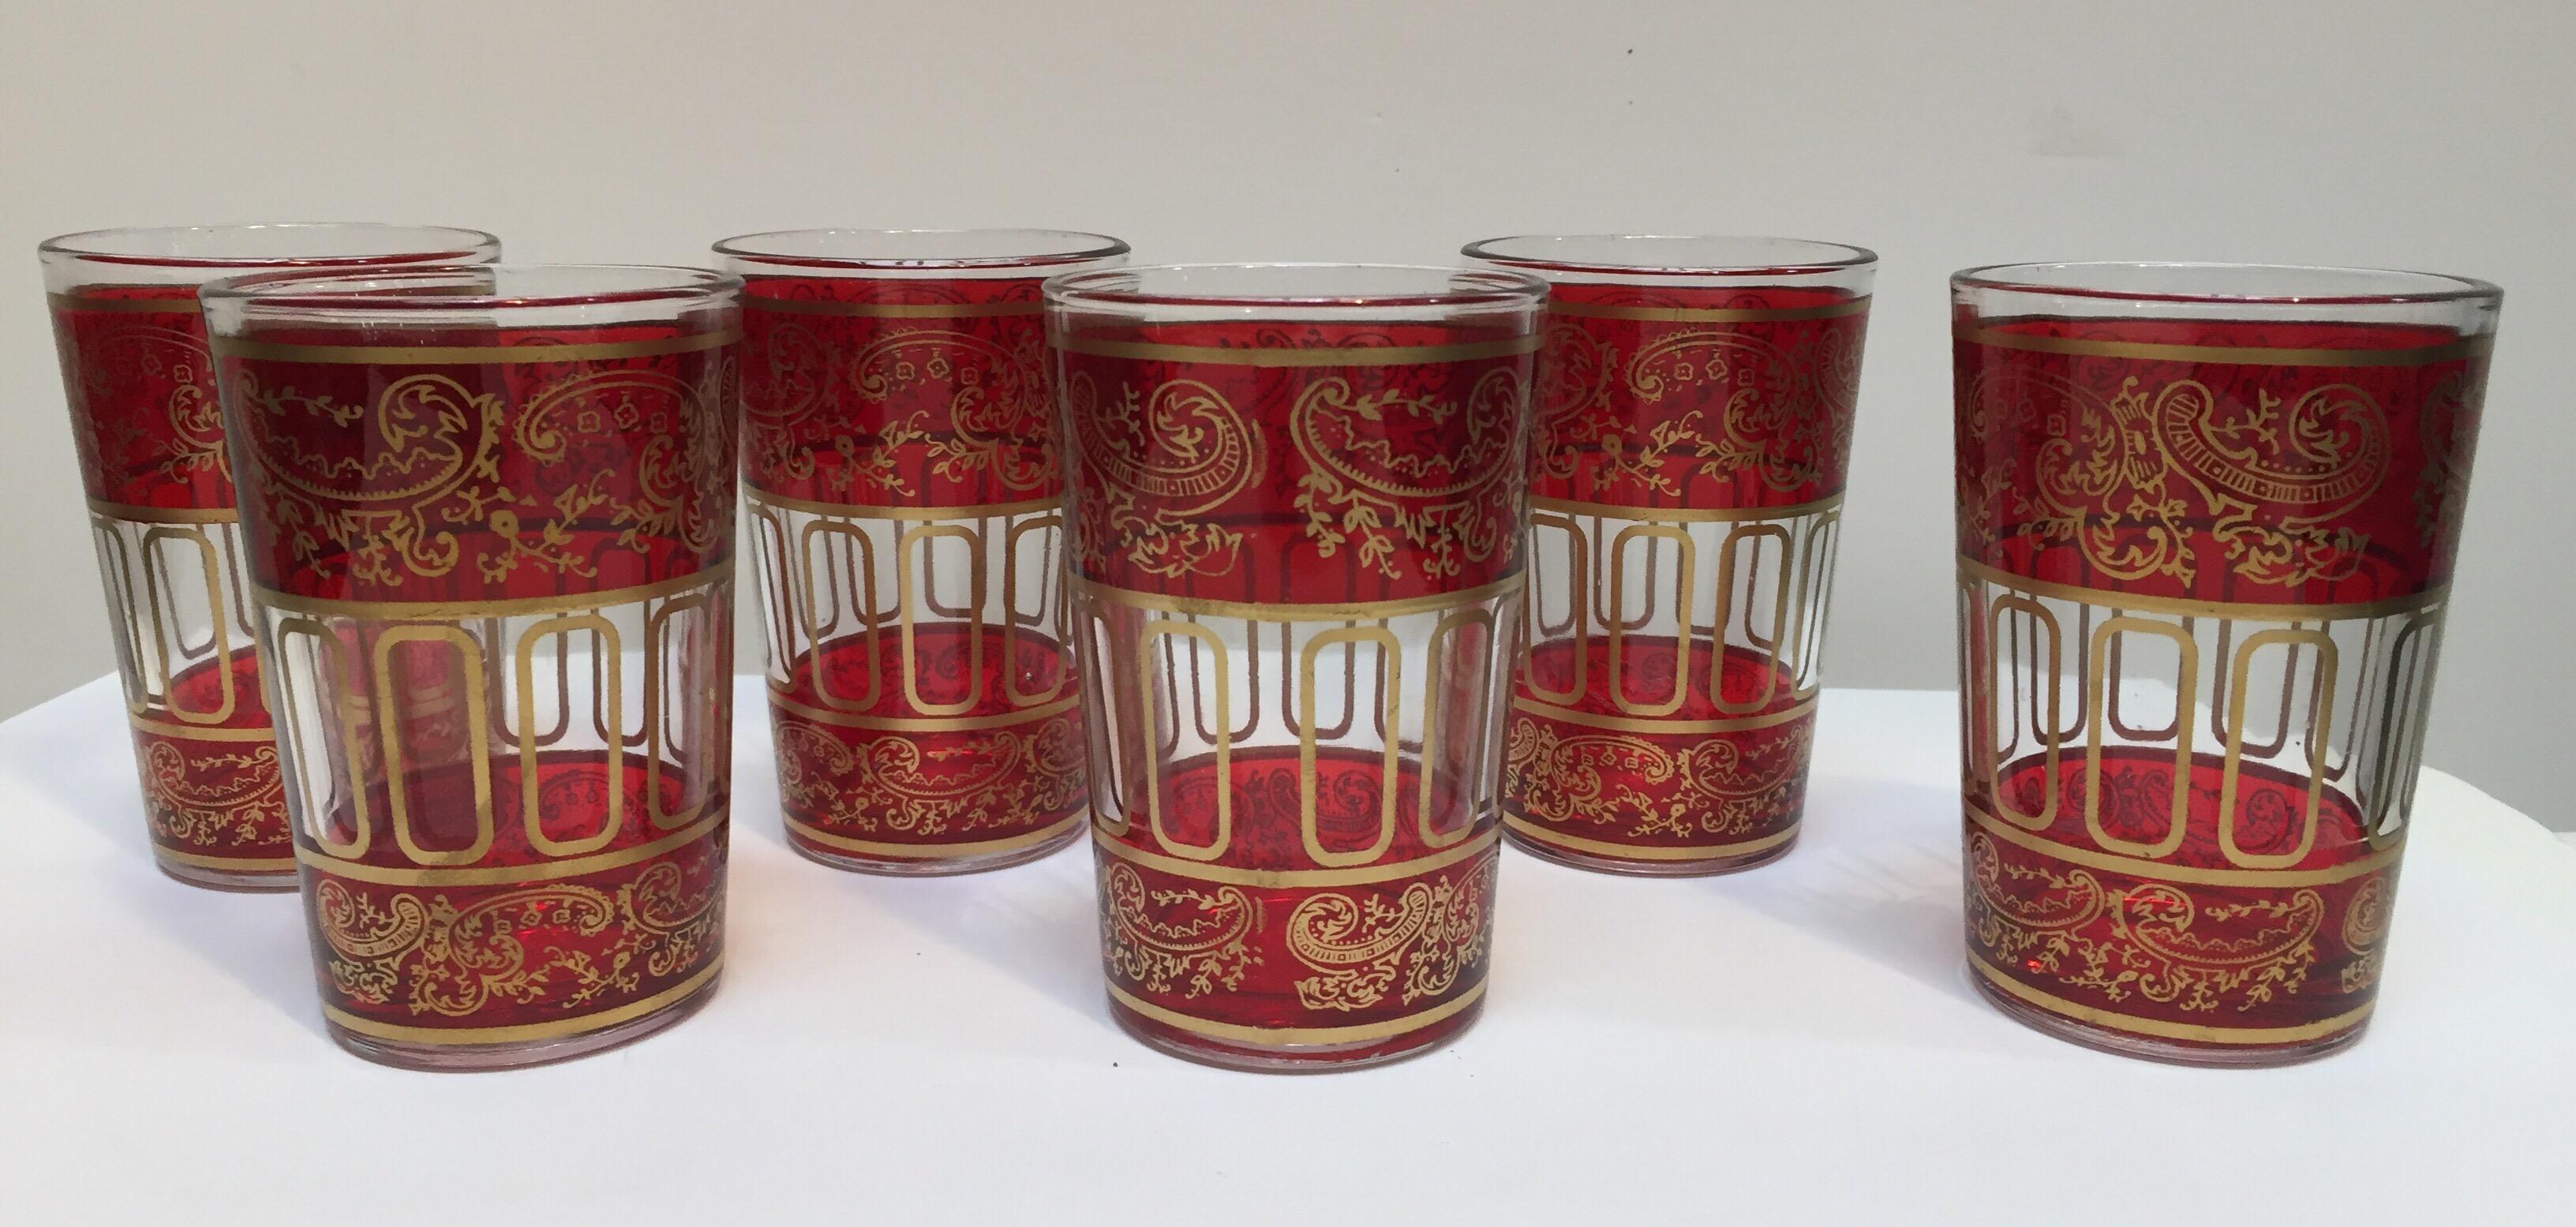 Set of six red Moroccan glasses with gold raised Moorish design.
Bohemian style drinking small shot ruby red glasses decorated with a classical gold and pattern Moorish frieze.
Use these elegant glasses for Moroccan tea, or any hot or cold drink.
In